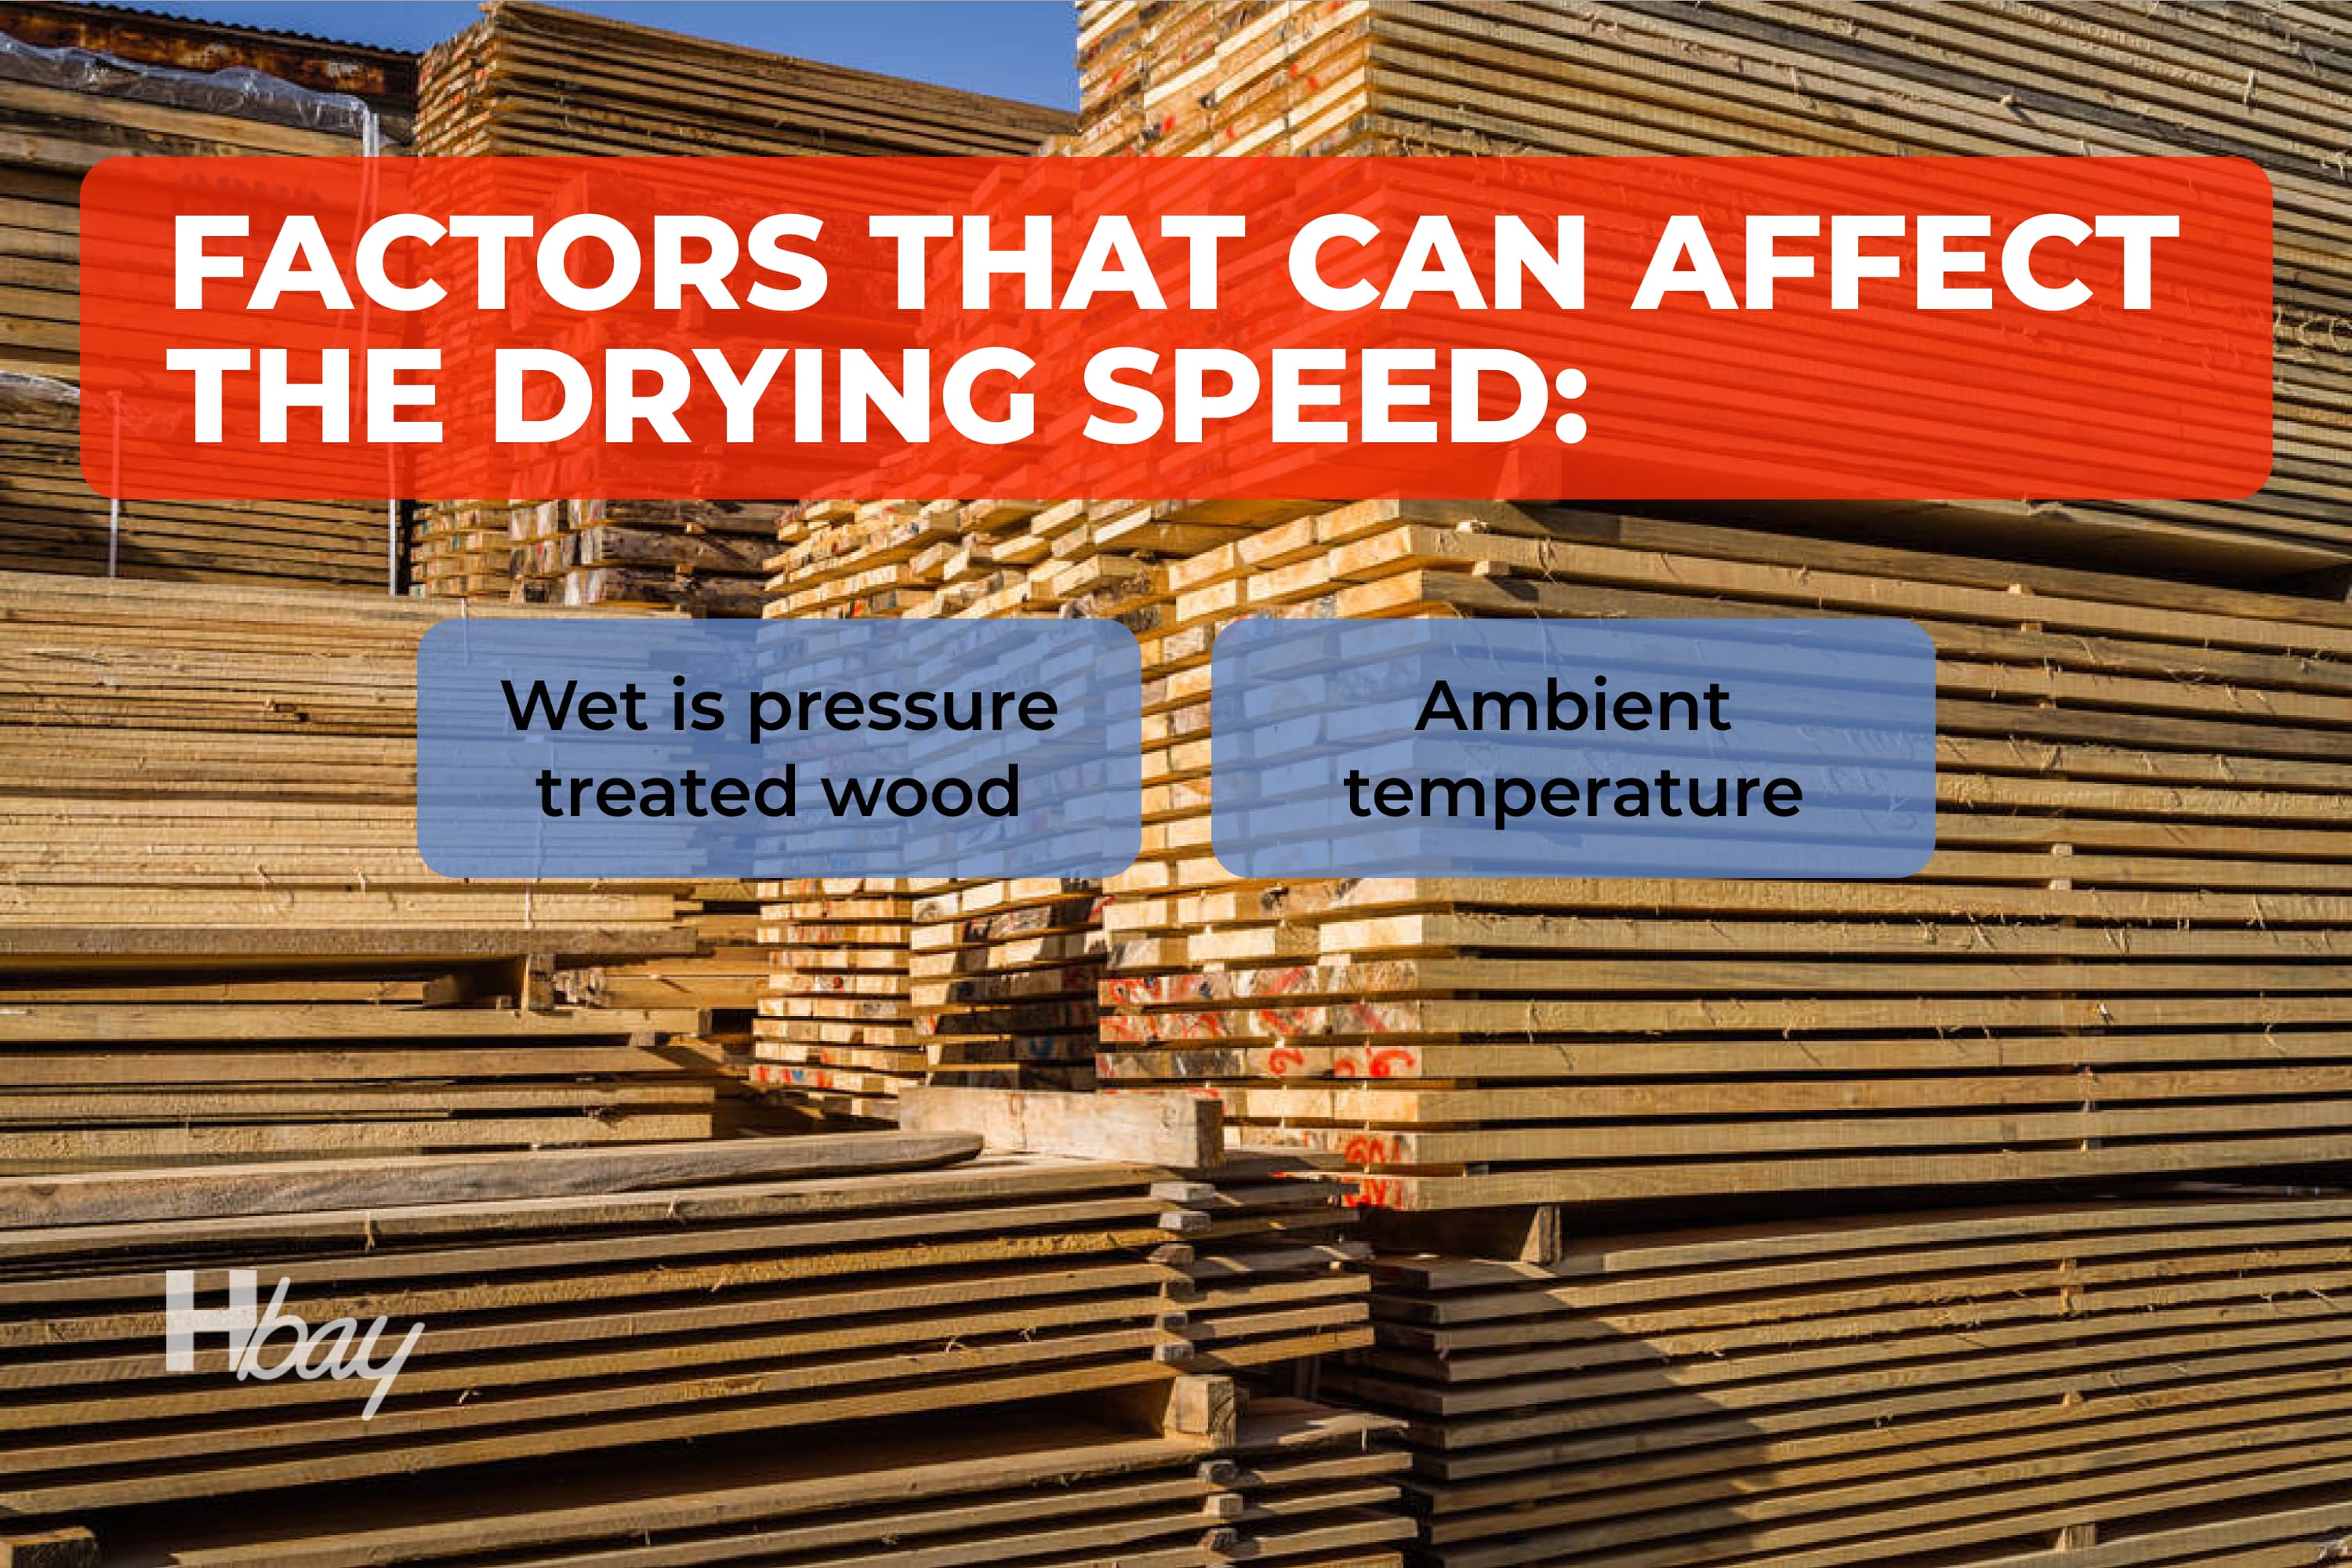 Factors that can affect the drying speed